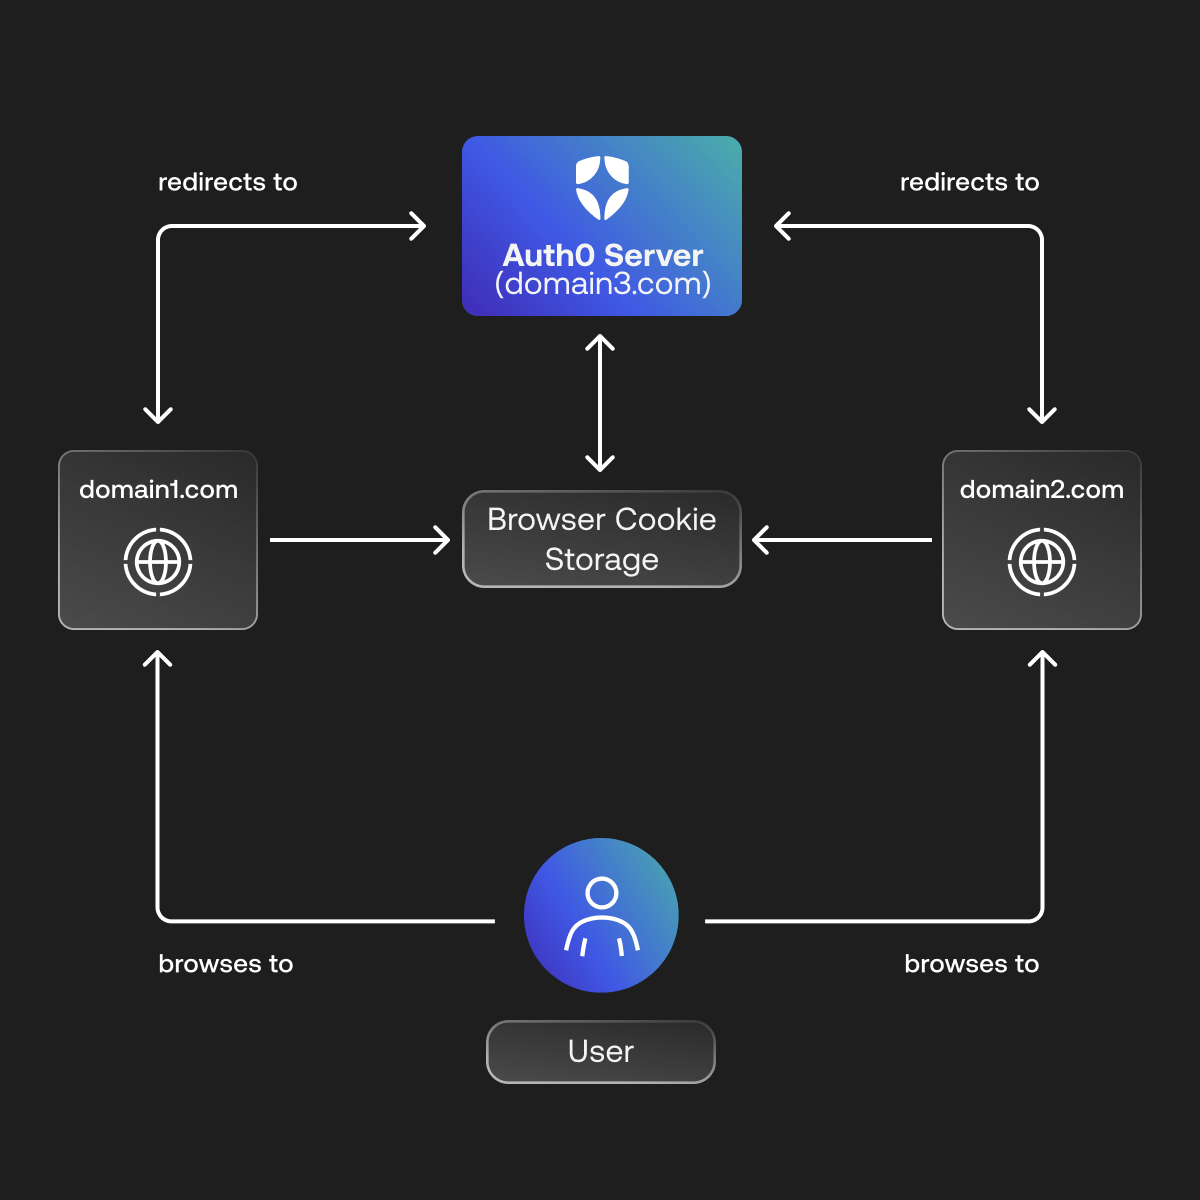 Diagram showing how an Auth0 server helps enable secure SSO for users with browser cookie storage and seamless authentication.